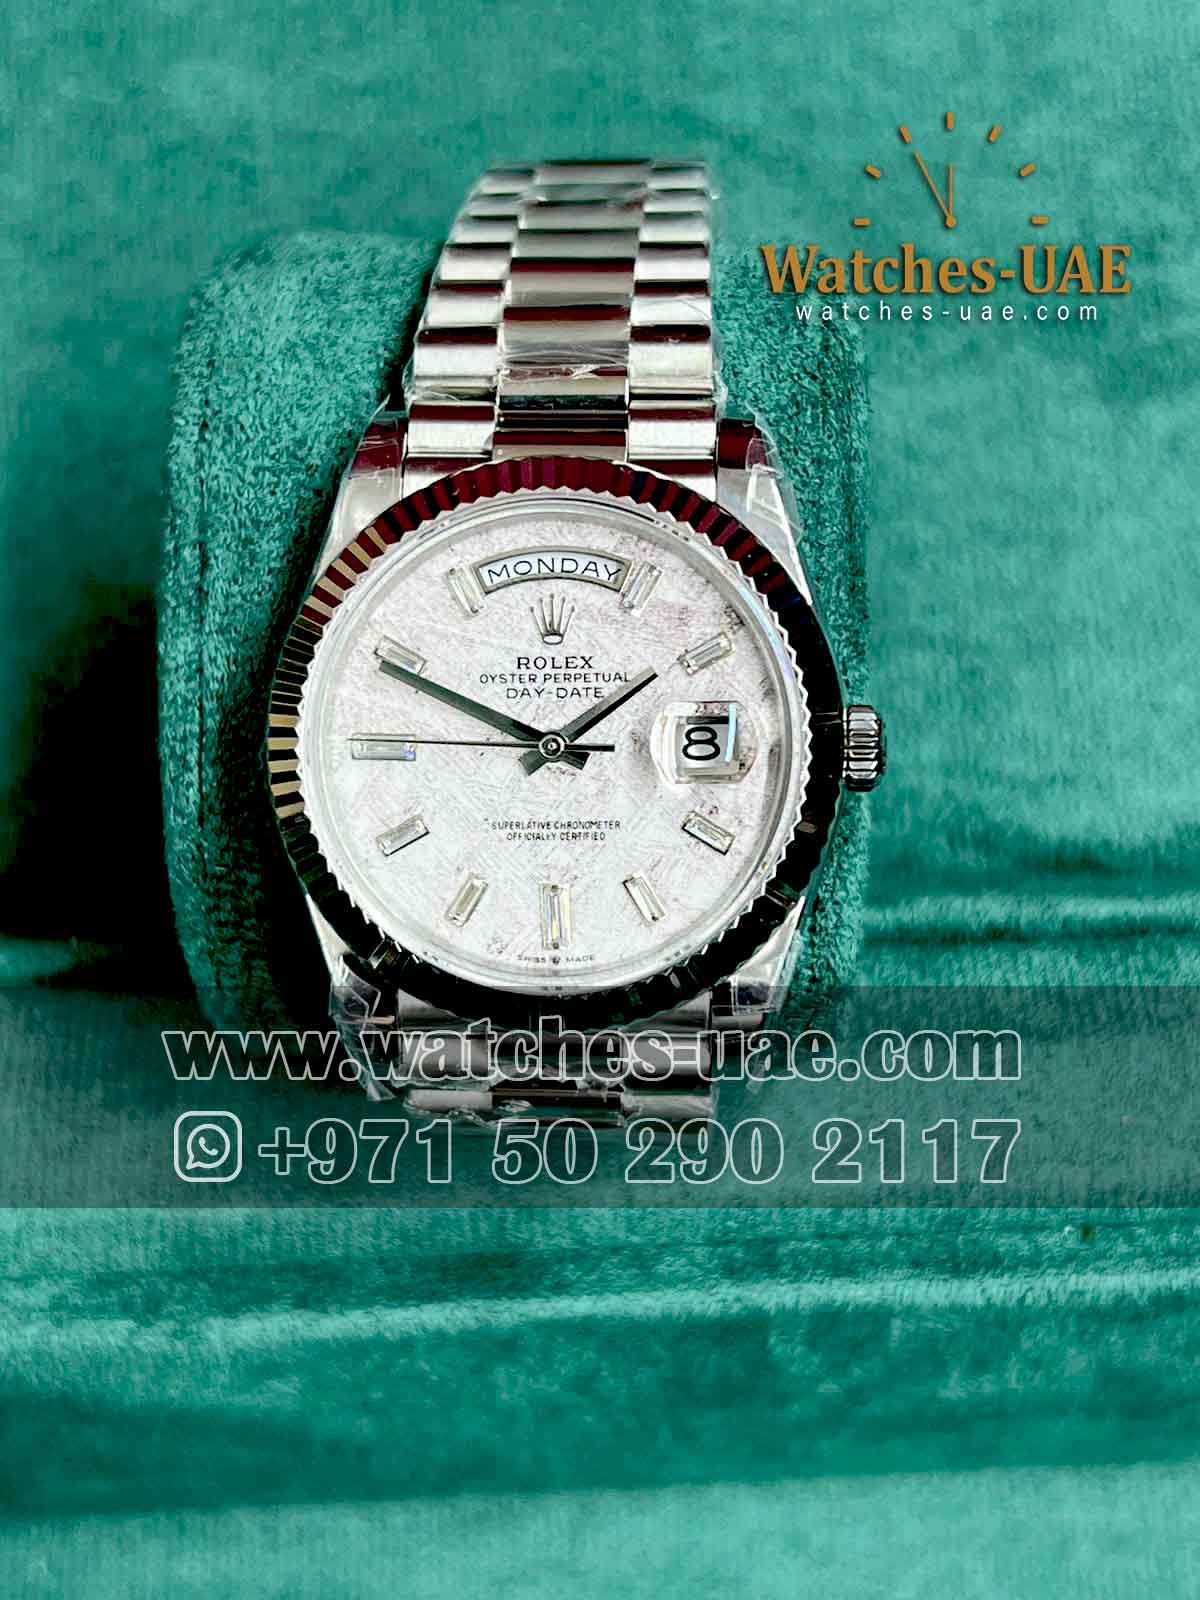 Rolex Day Date 40 mm White Dial - Watches UAE